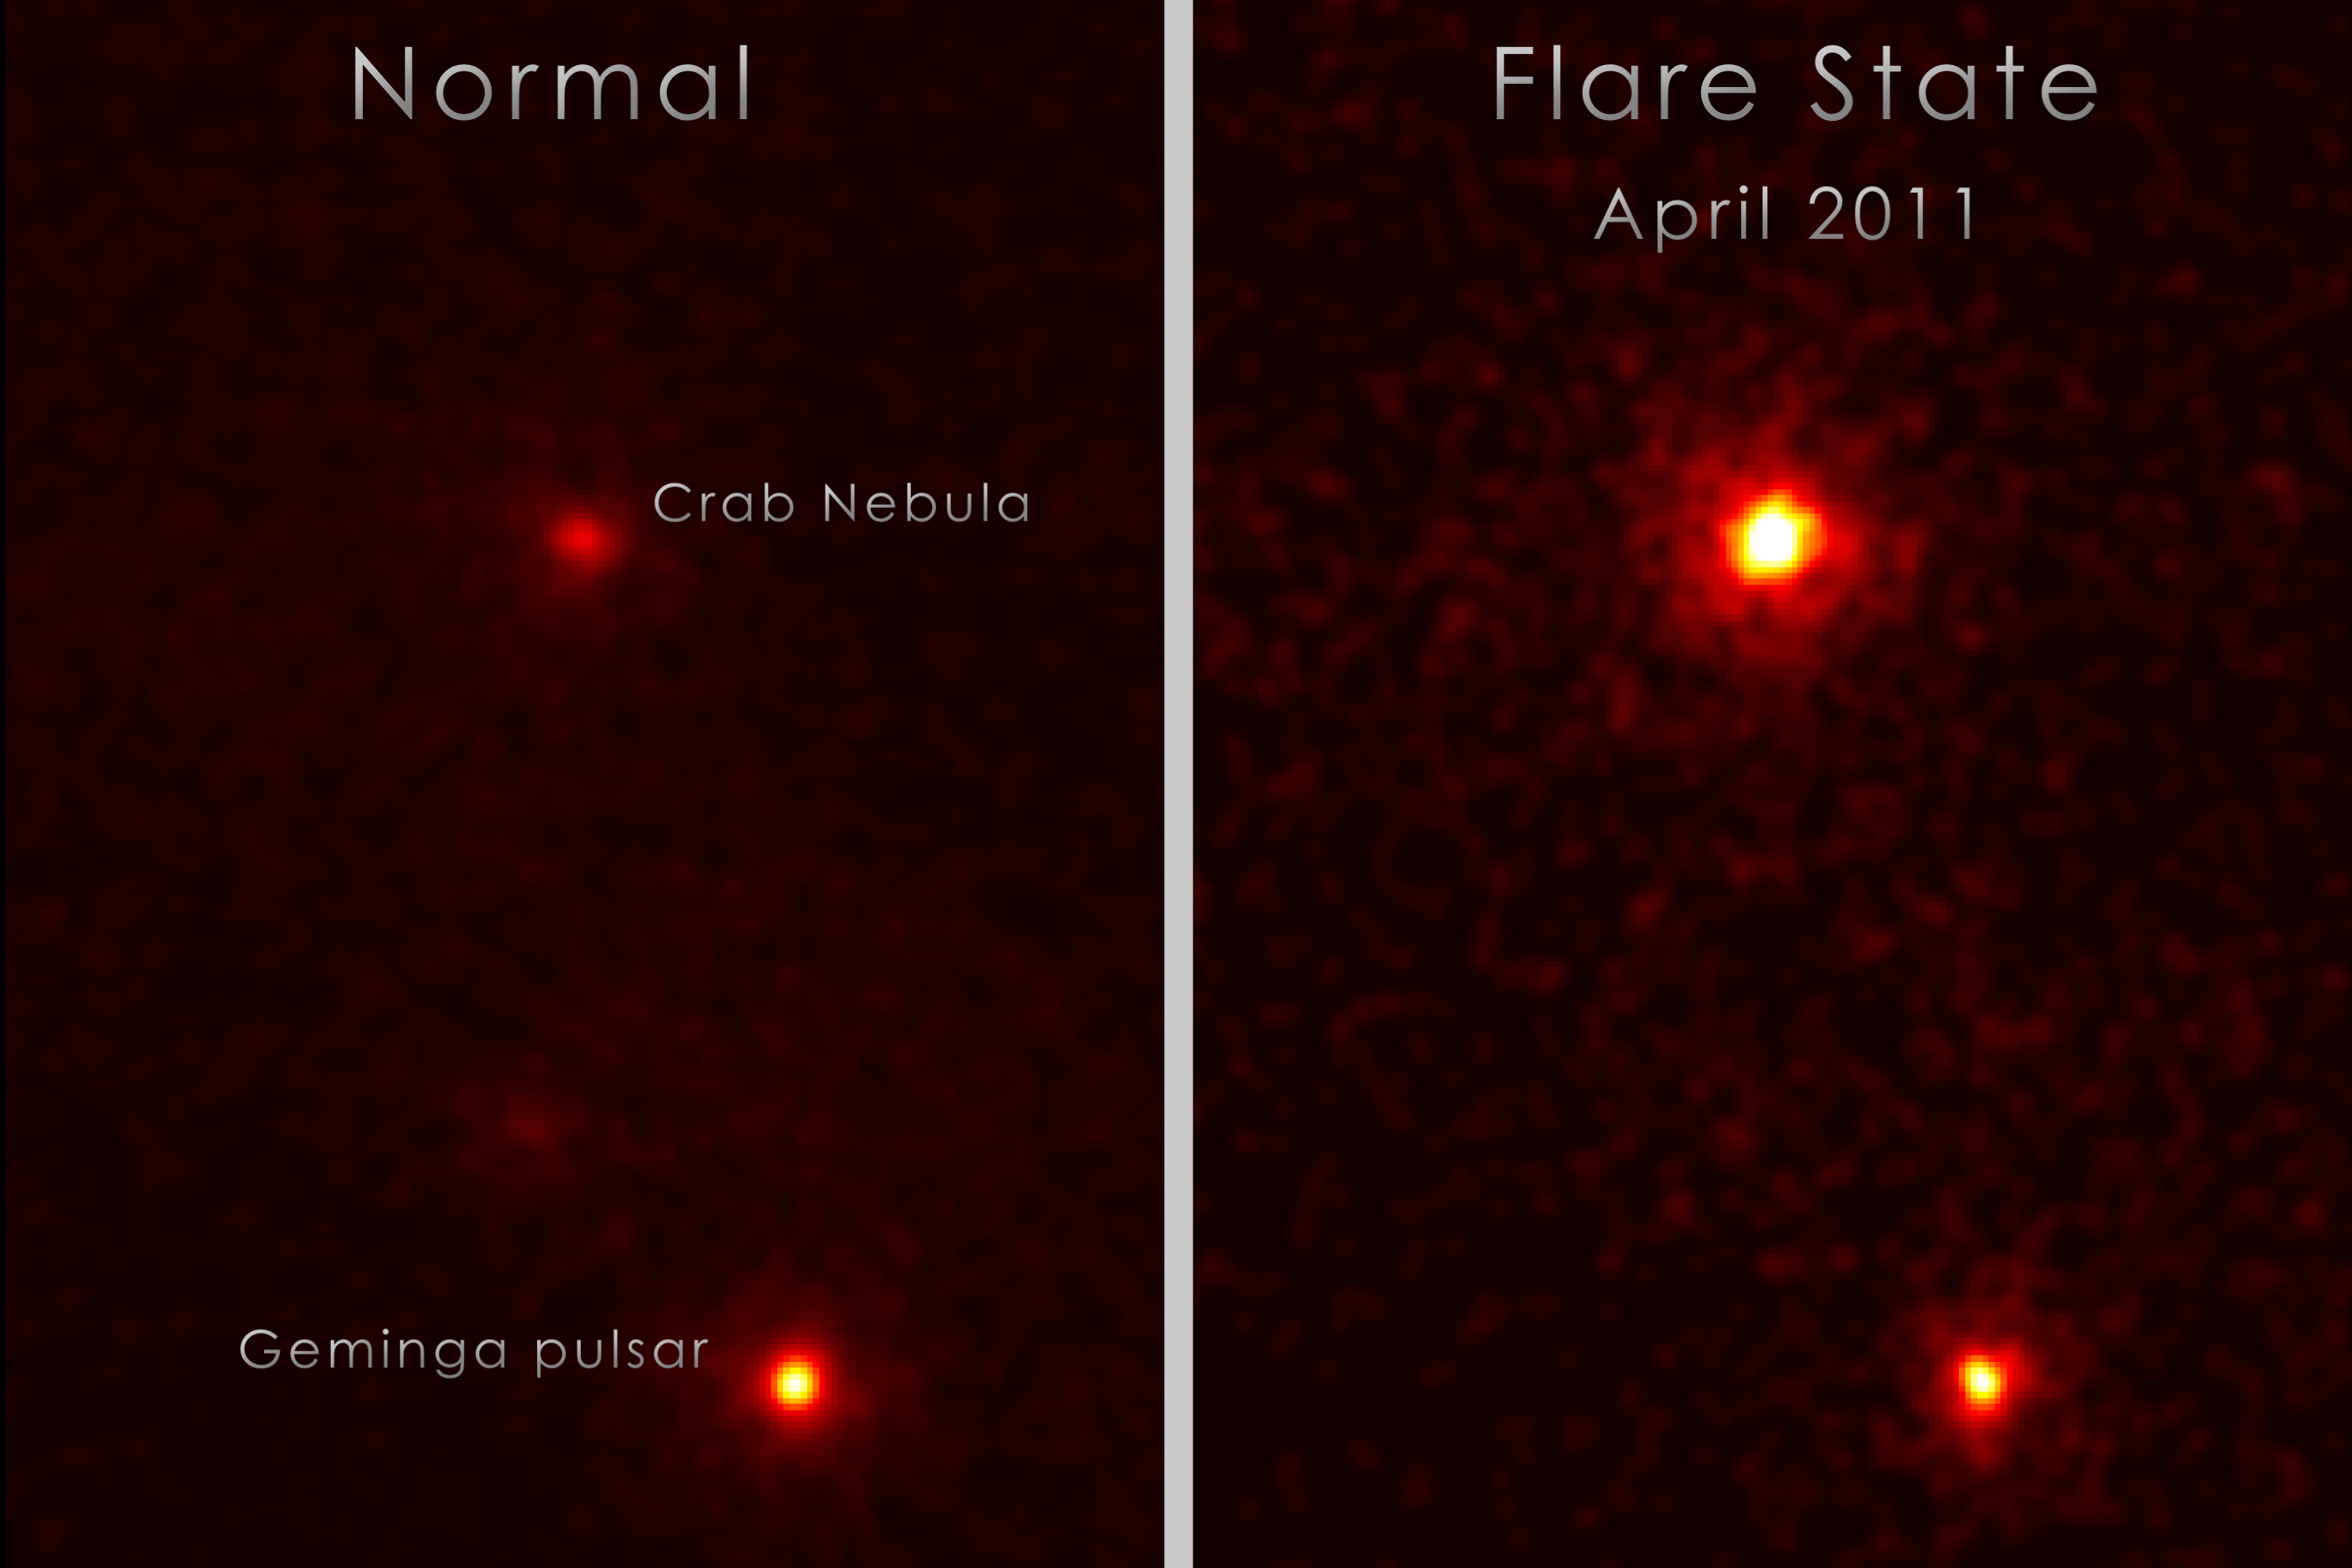 An Unexpected Flare from the Crab Nebula (NASA's Atronomy Picture of the Day - May 23, 2011)